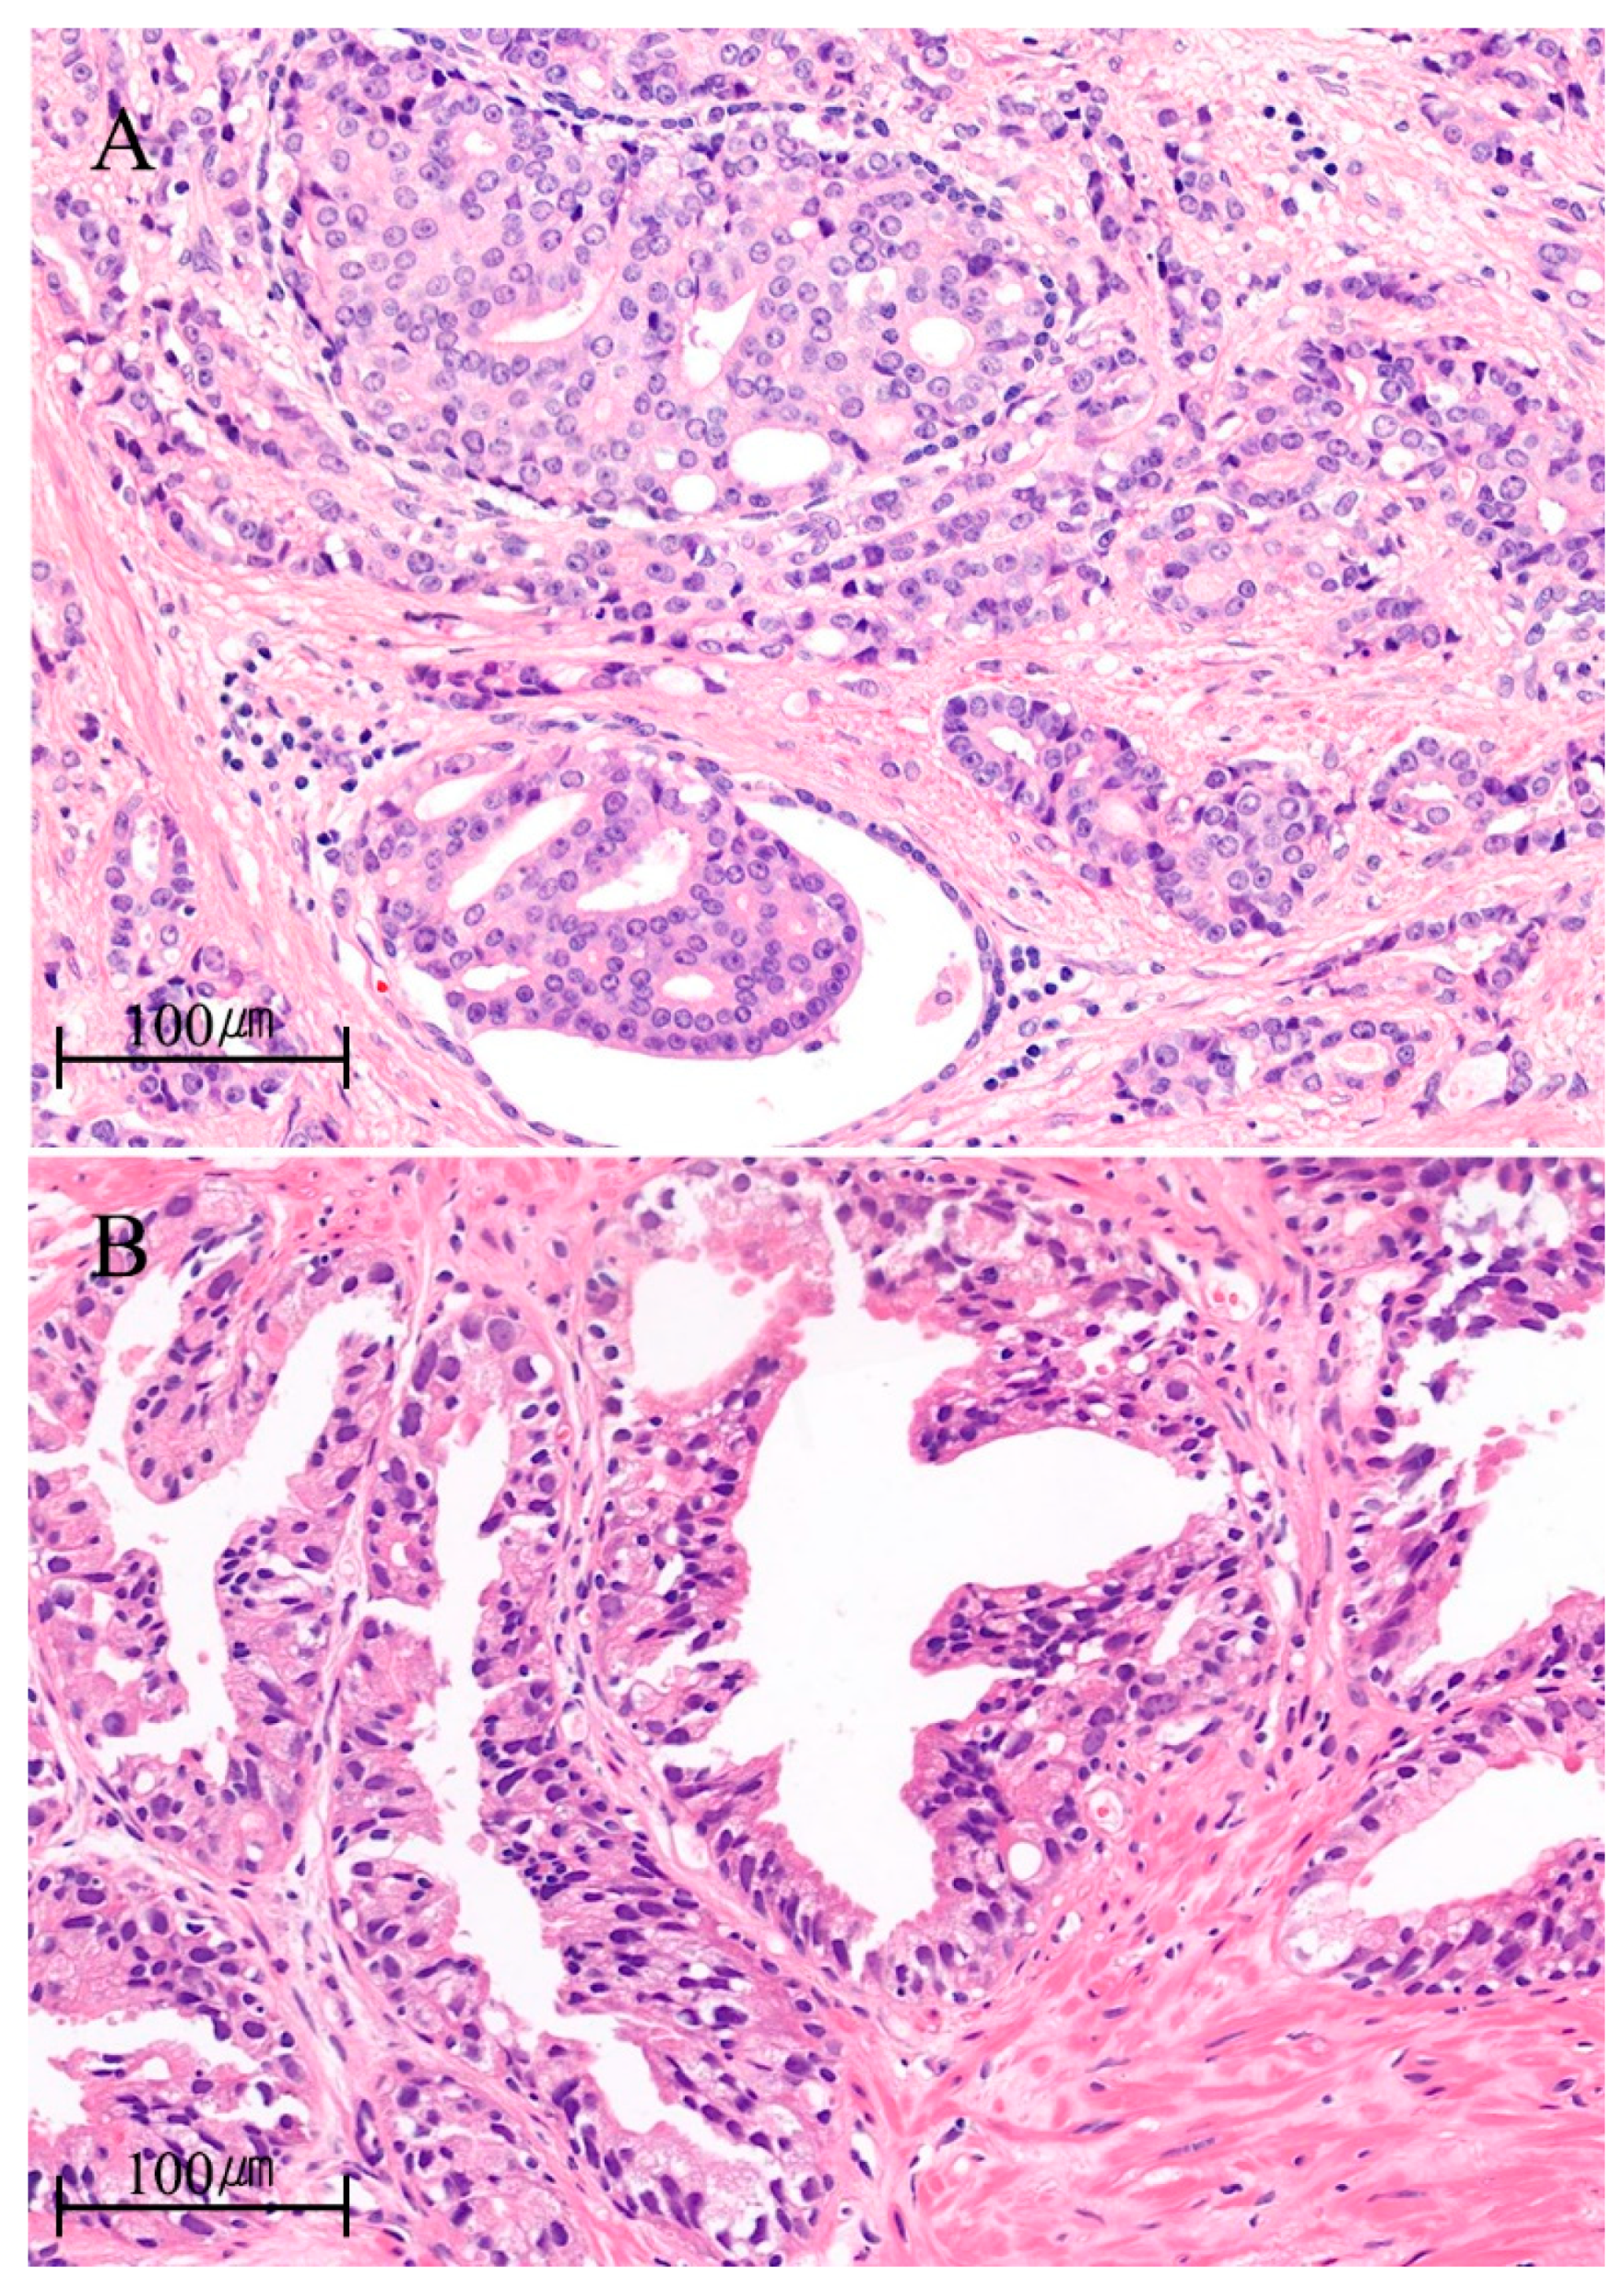 Intraductal papilloma with dcis pathology outlines